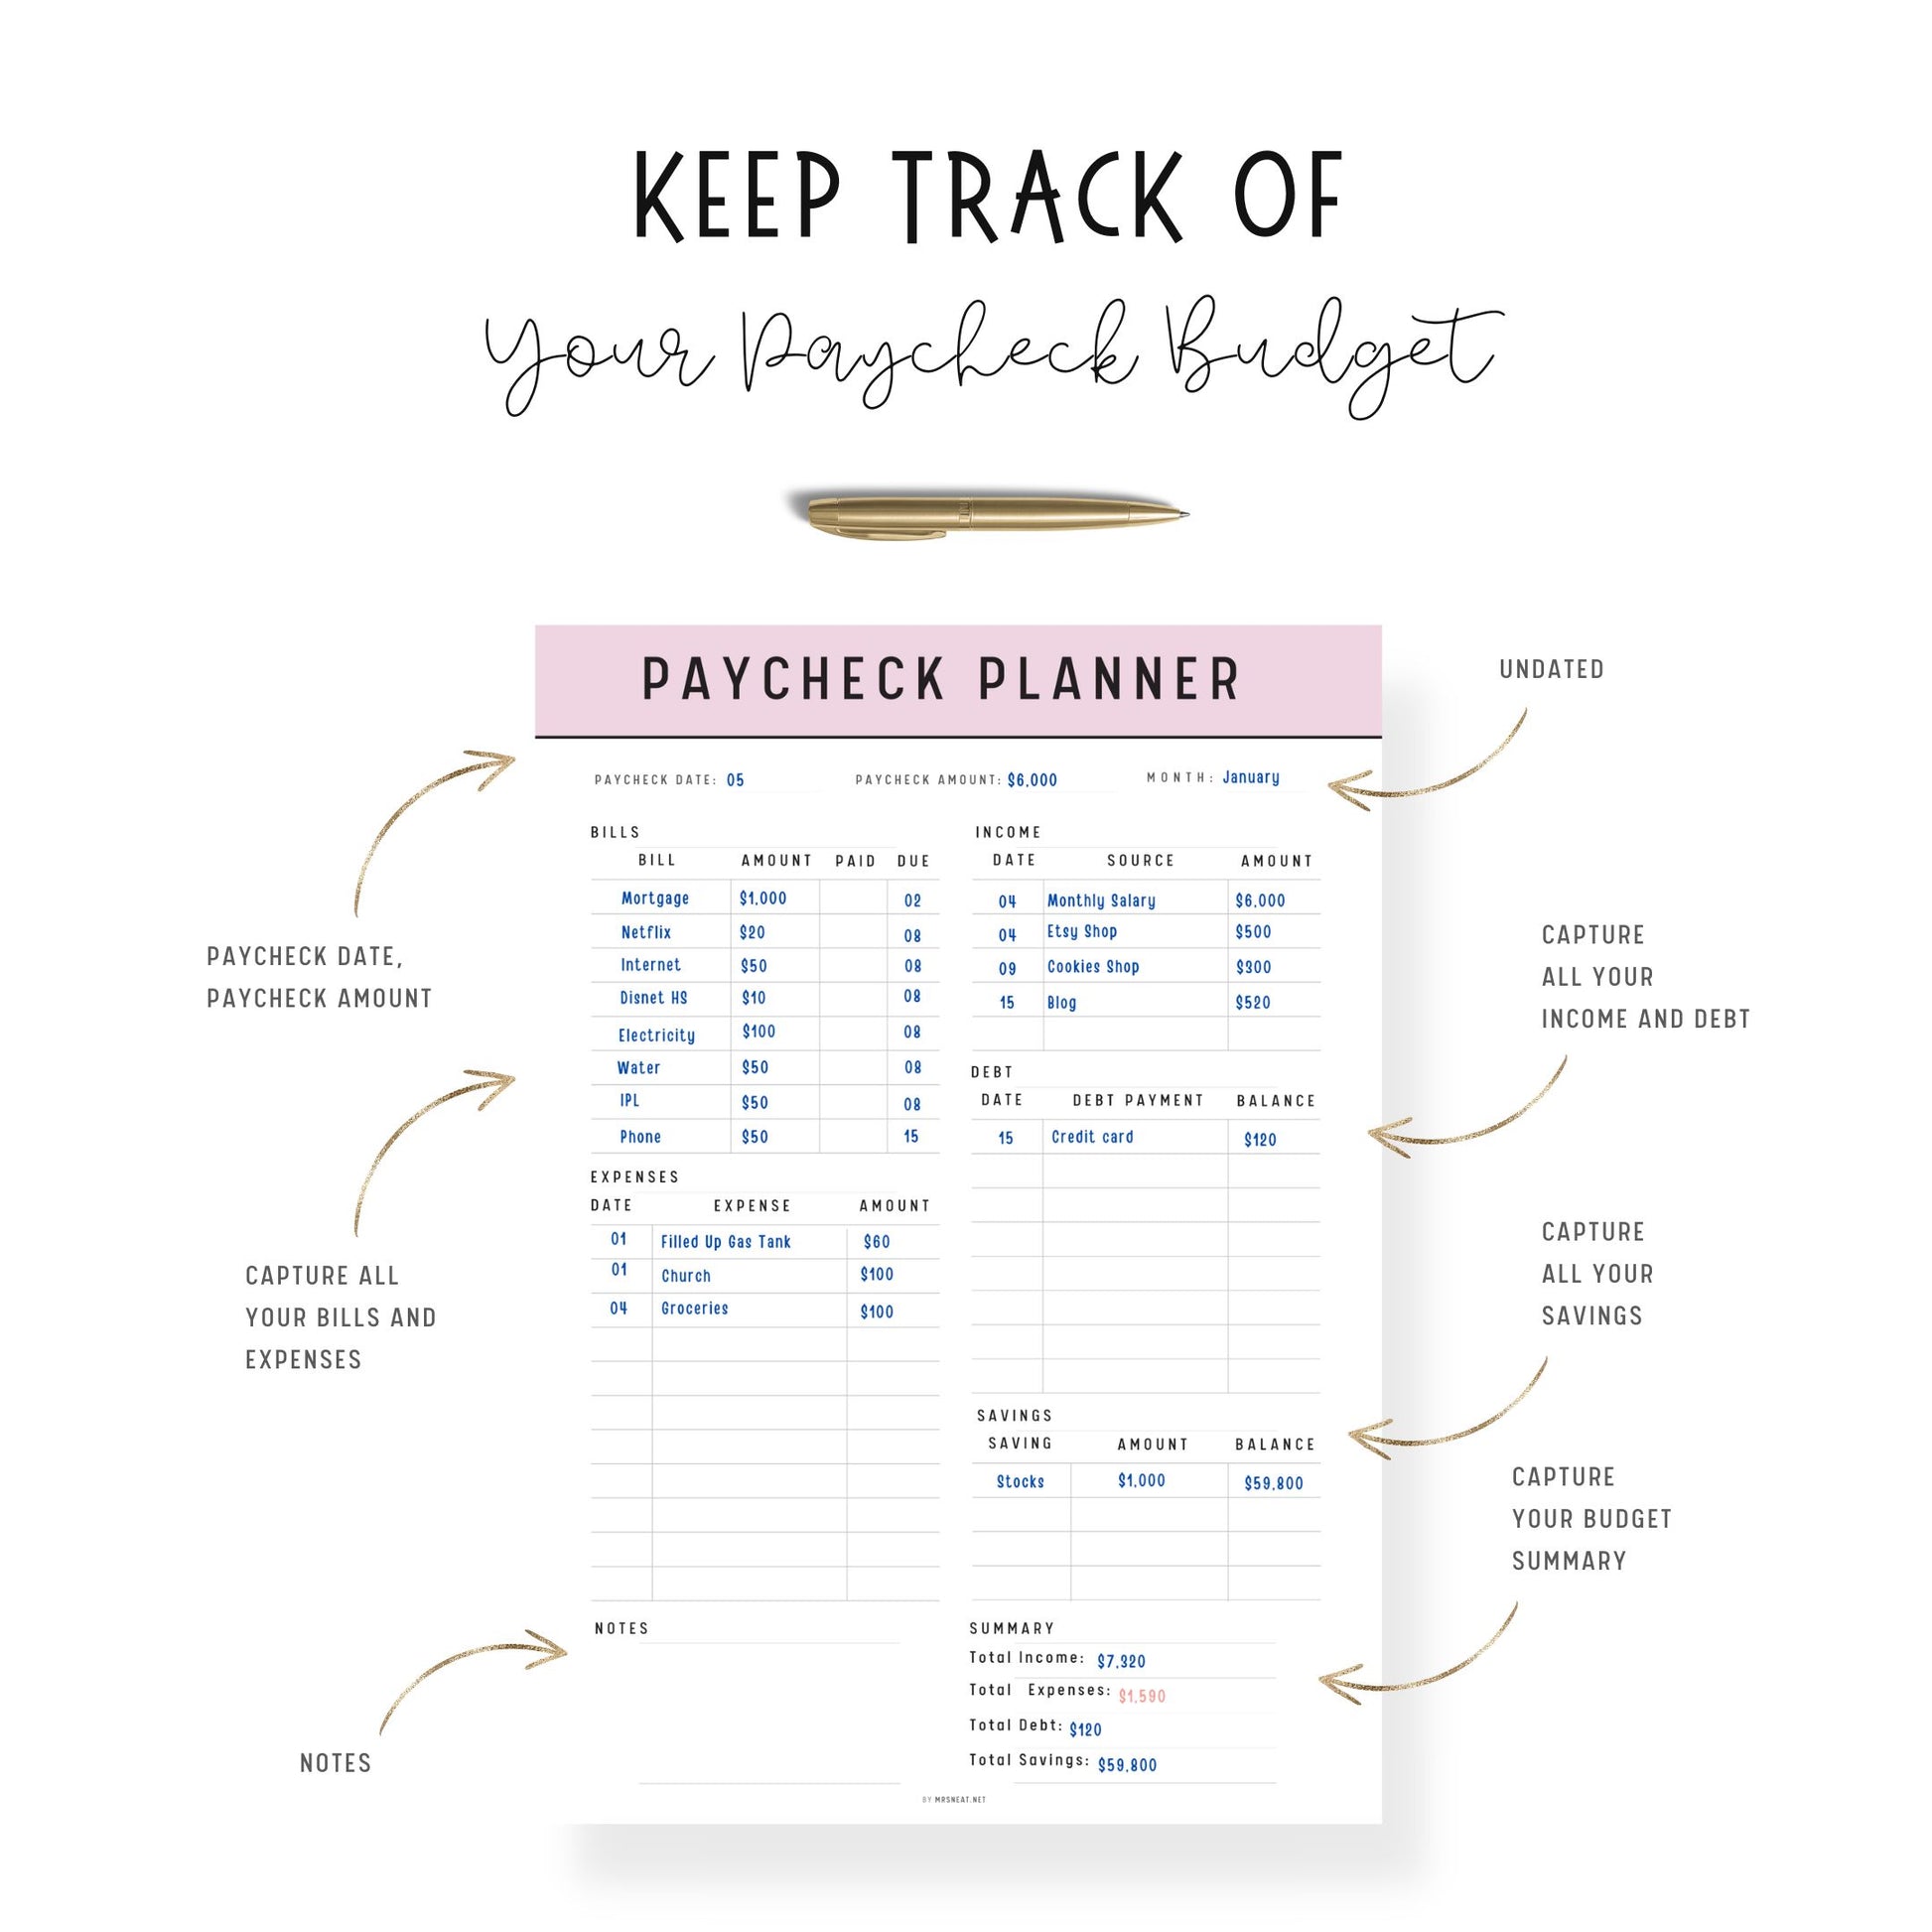 Paycheck Budget Template Printable, A4, A5, Letter, Half Letter, 5 color options included, Green, Peach, Blue, Pink, Minimalist Budget Planner Template, Digital Planner